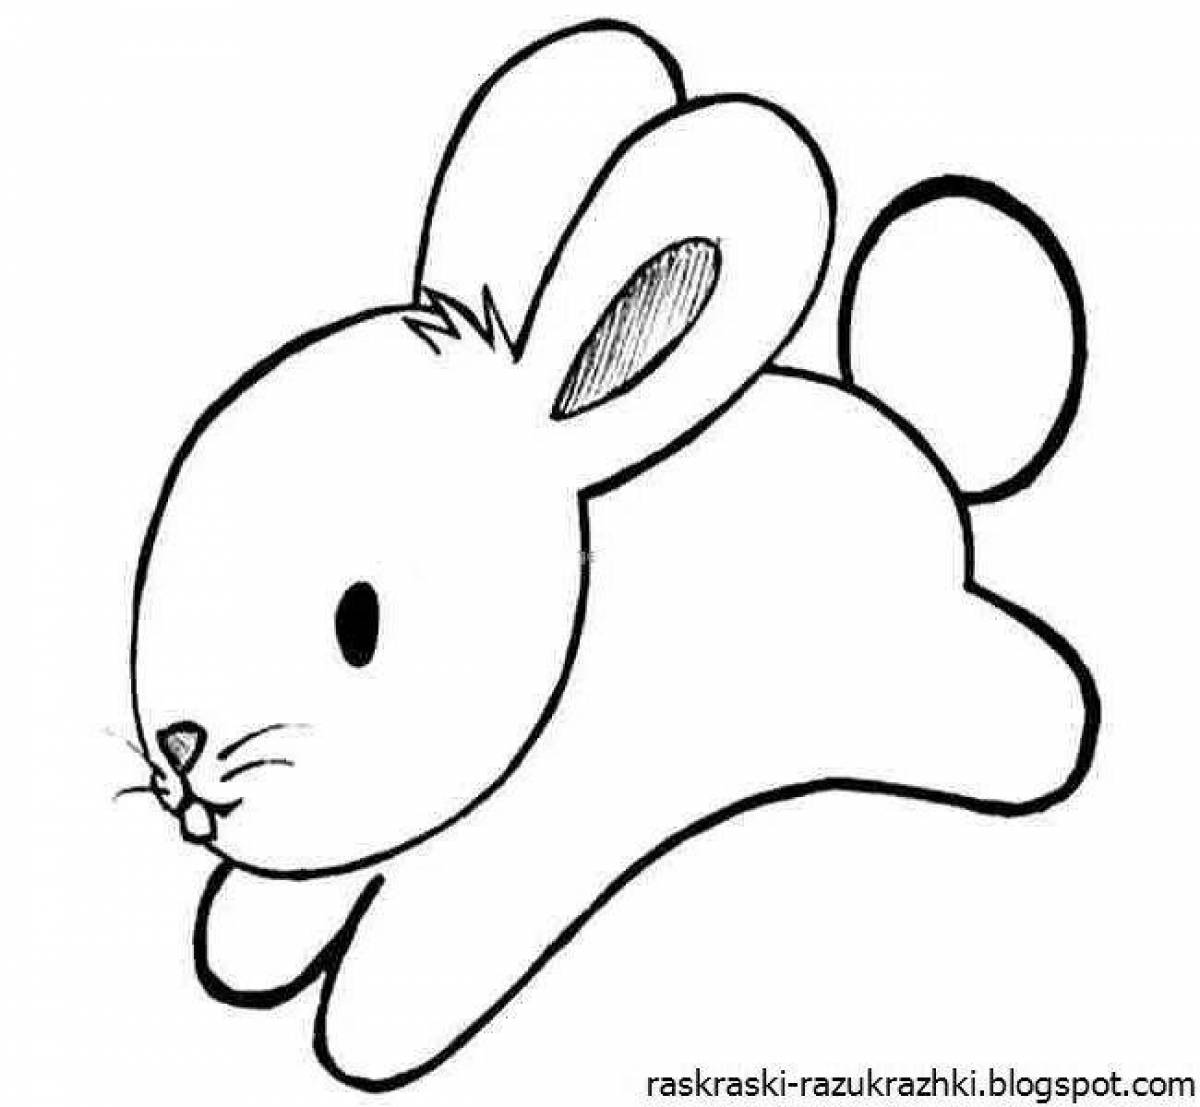 Fancy Bunny Coloring Page for 6-7 year olds